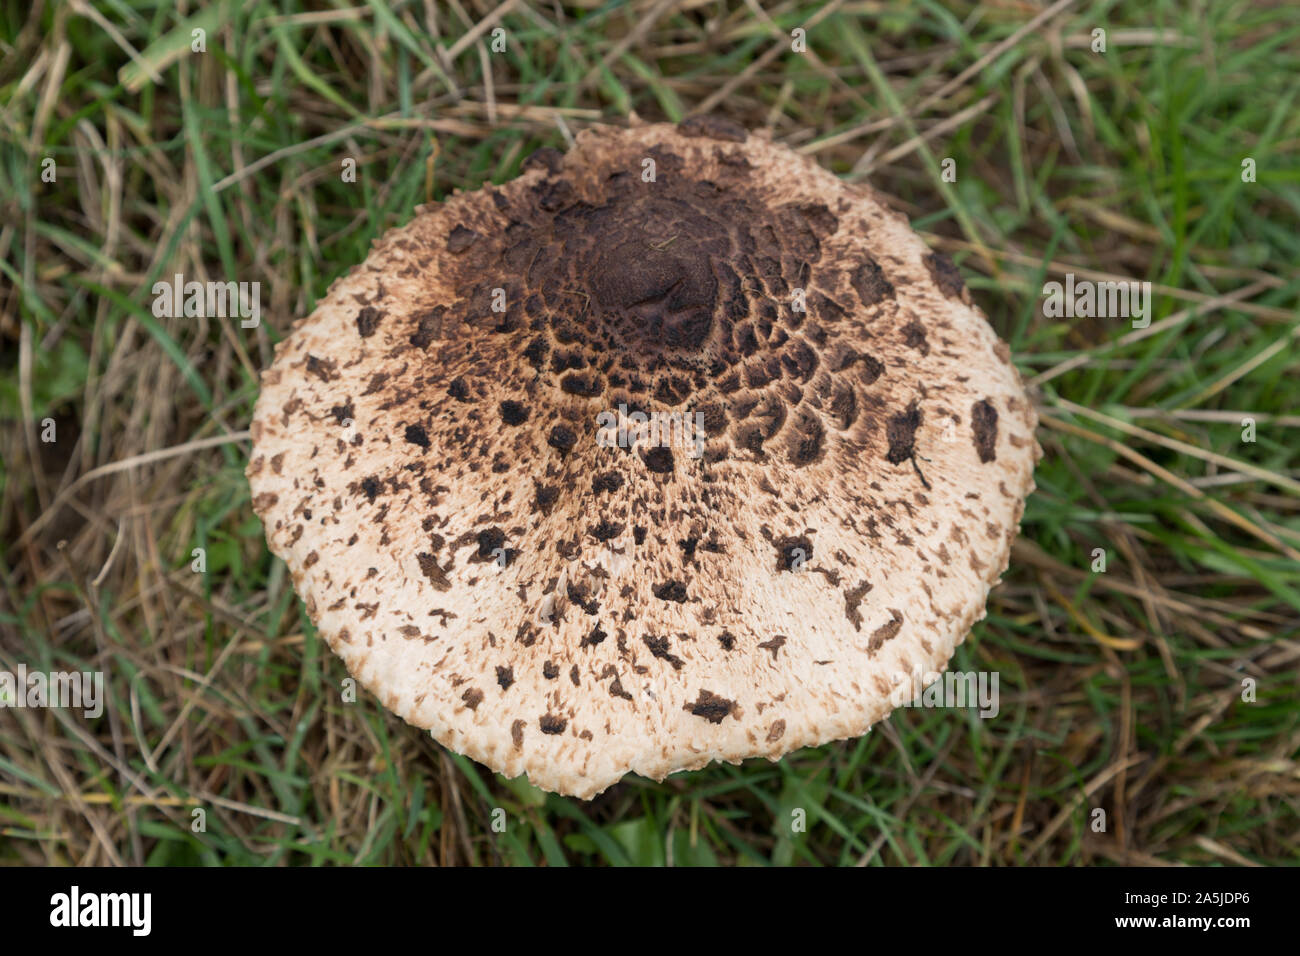 Exempted umbrella of giant umbrella or parasol fungus with scaly skin.The common giant parasol, parasol or giant paragal fungus (Macrolepiota procera) Stock Photo